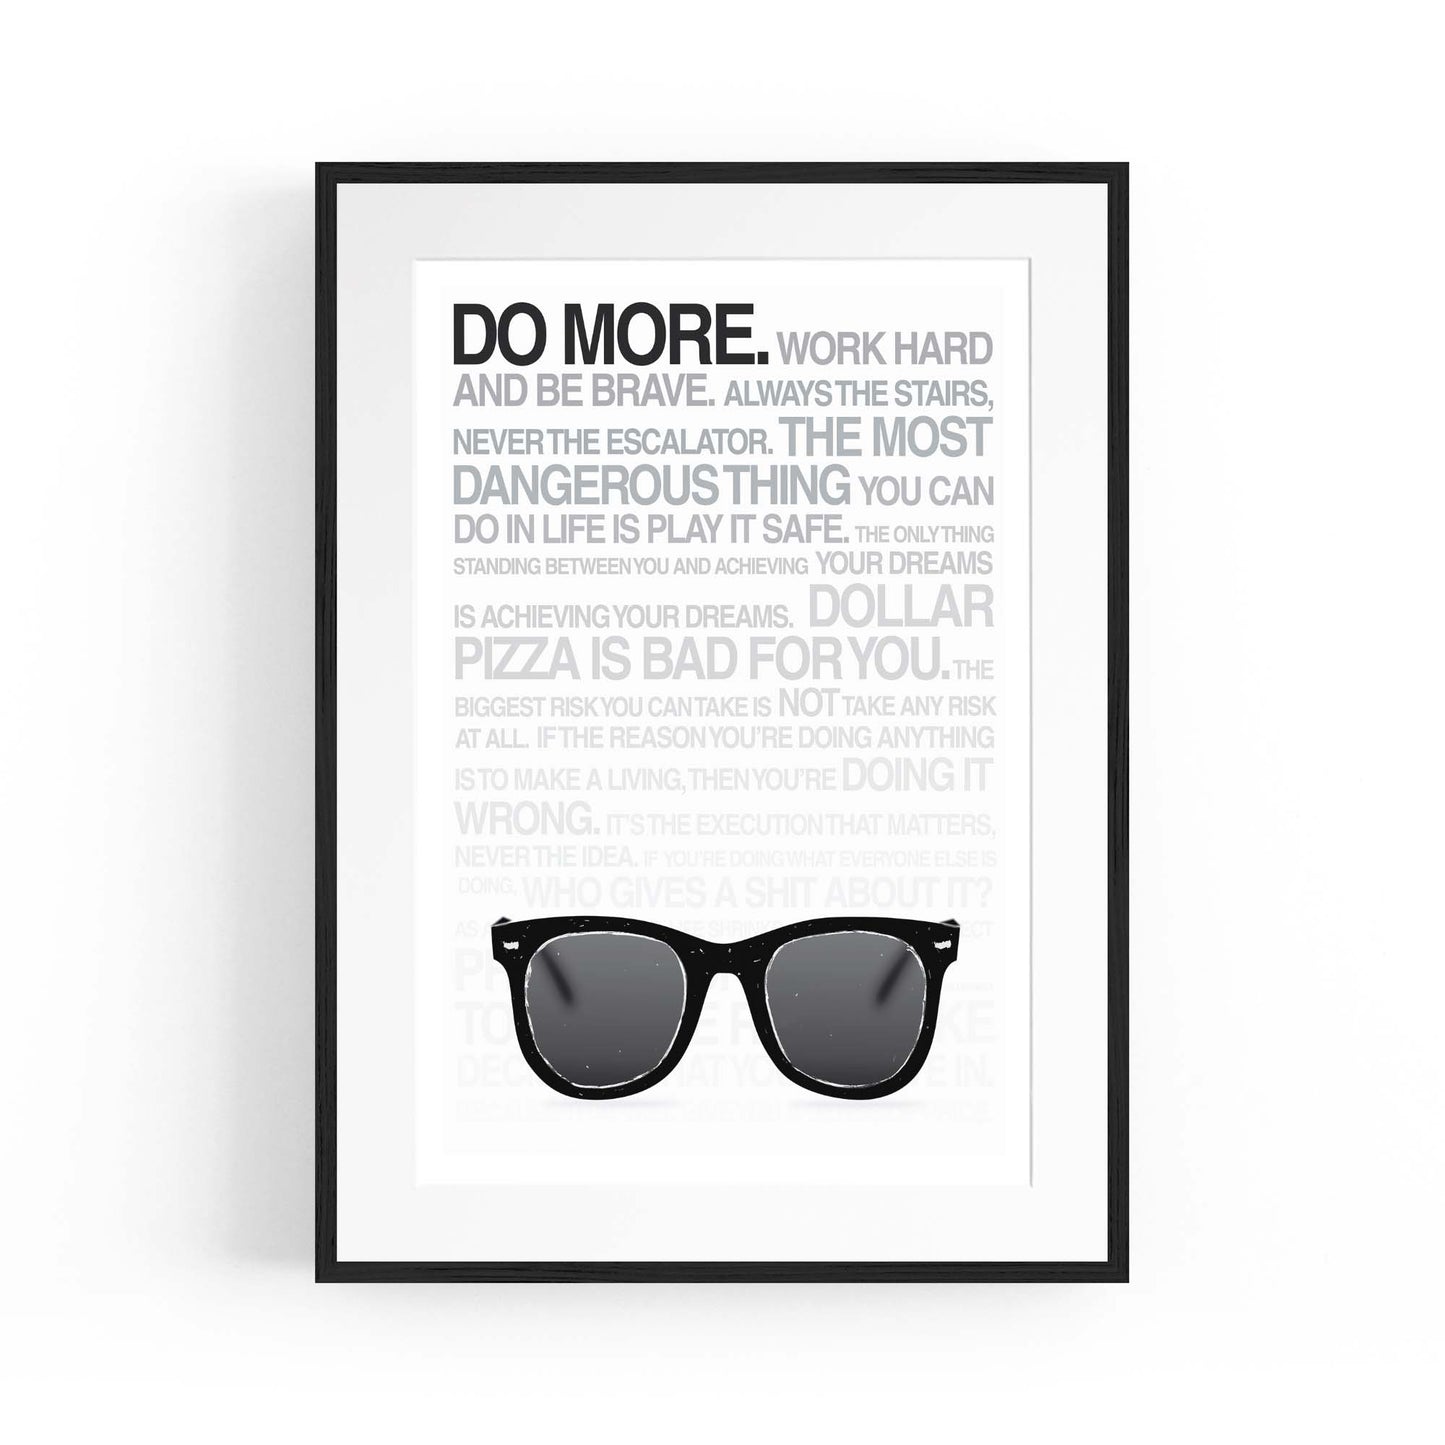 "Do More" Work Office Motivational Quote Wall Art - The Affordable Art Company